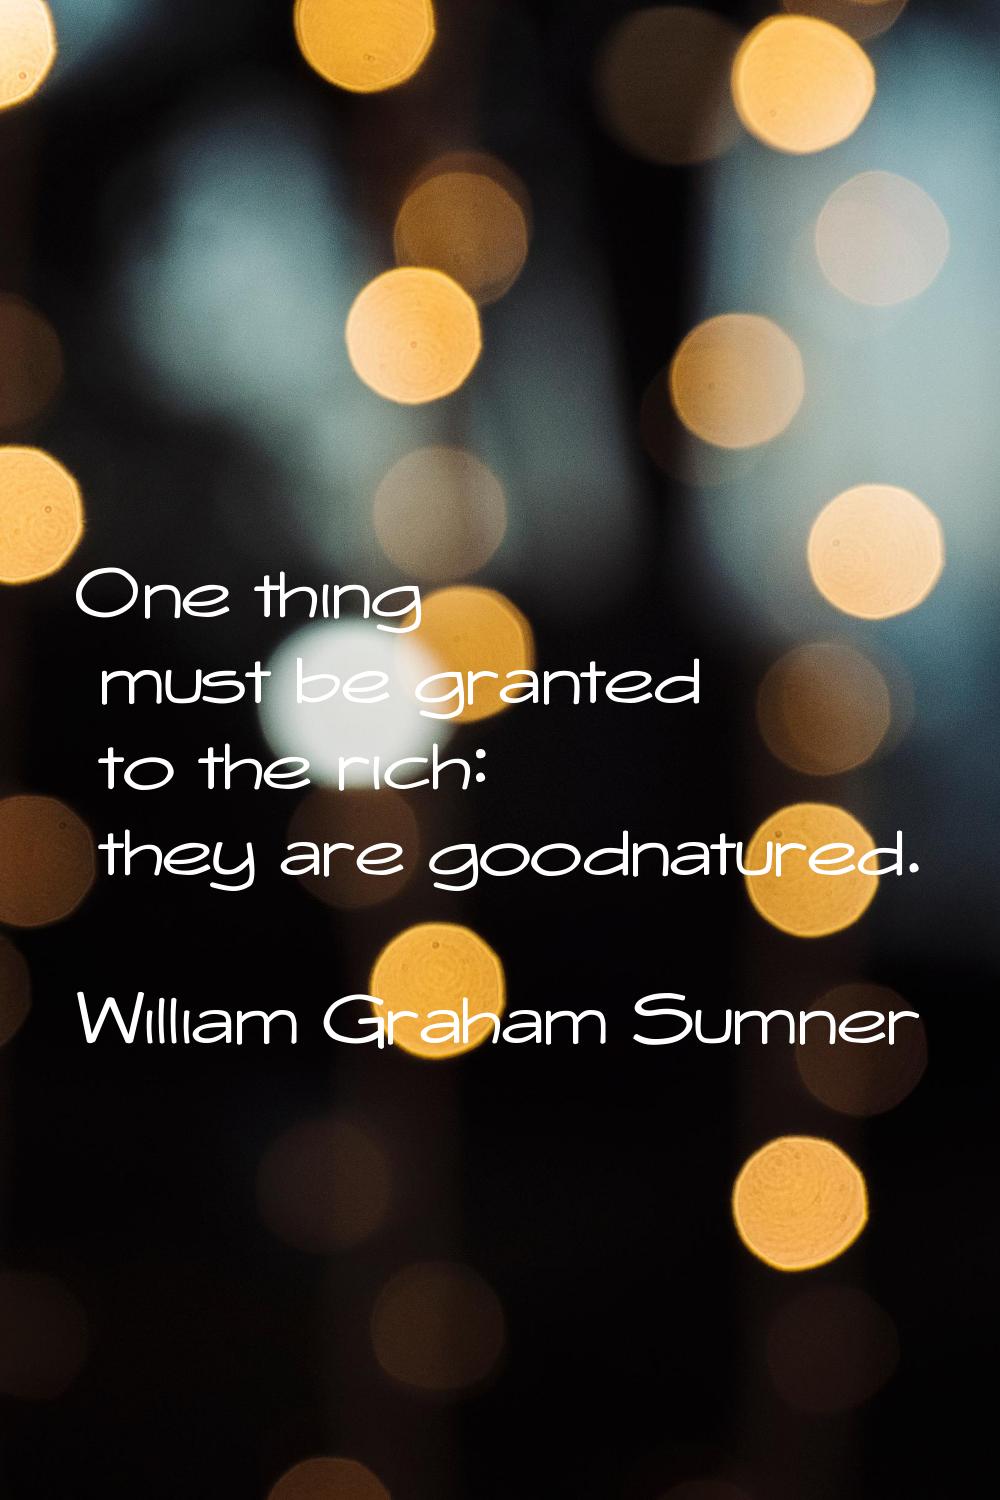 One thing must be granted to the rich: they are goodnatured.